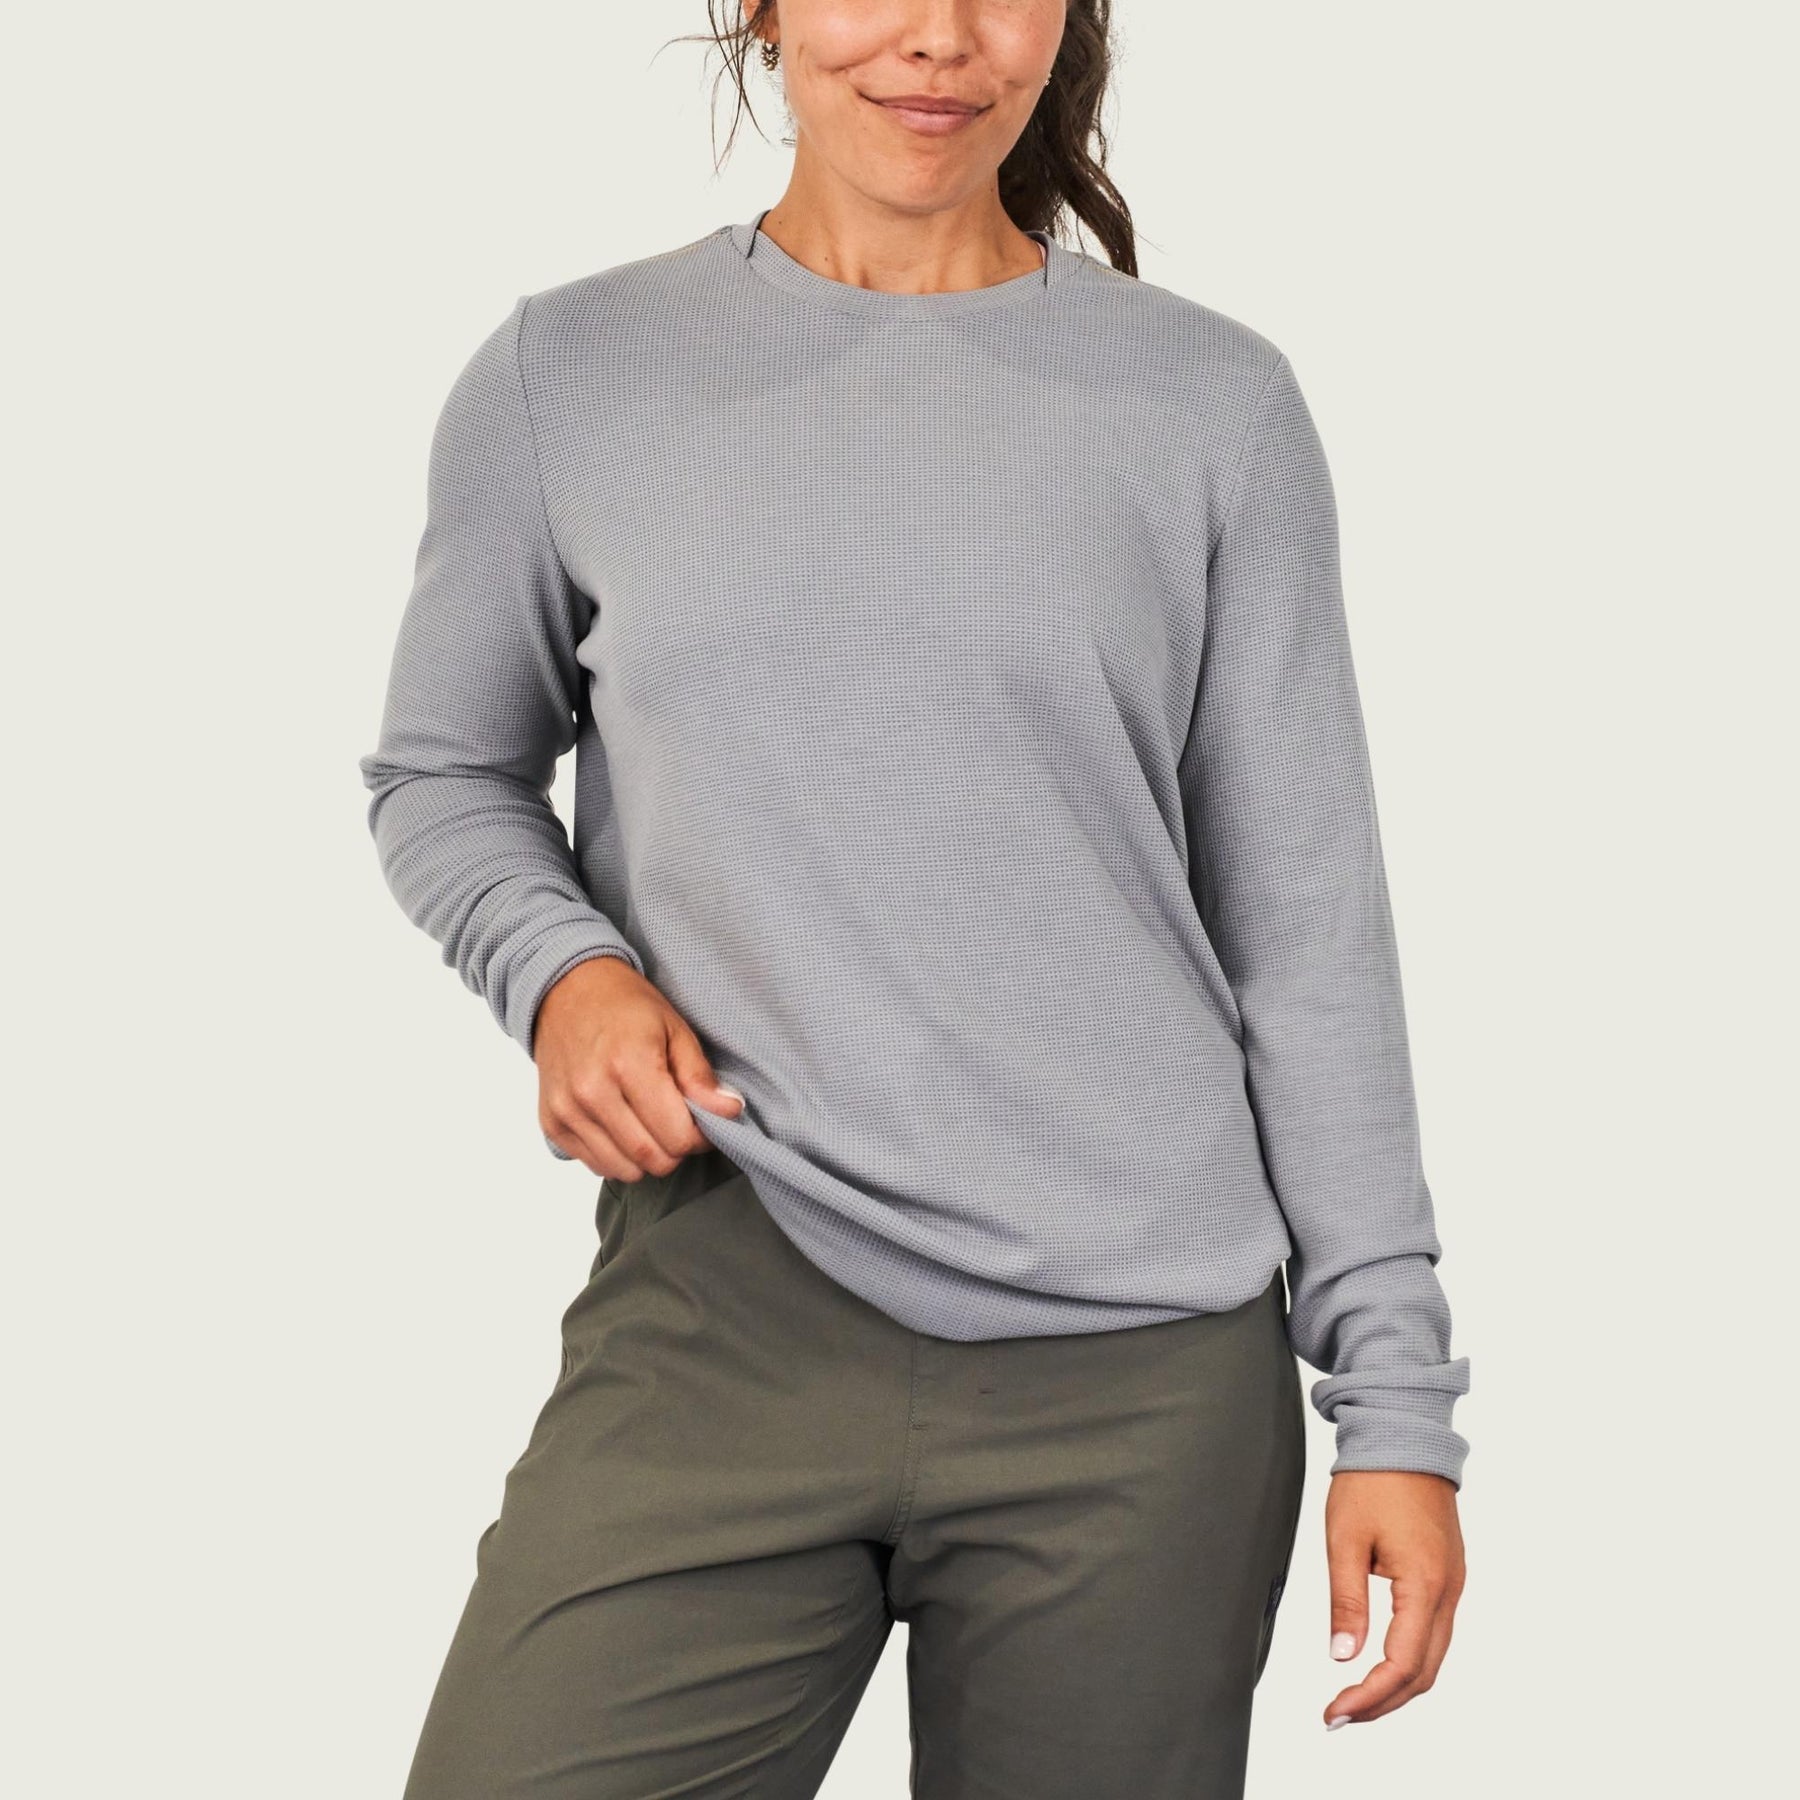 – Wear Crew Thermal Marsh Tyber Clothing